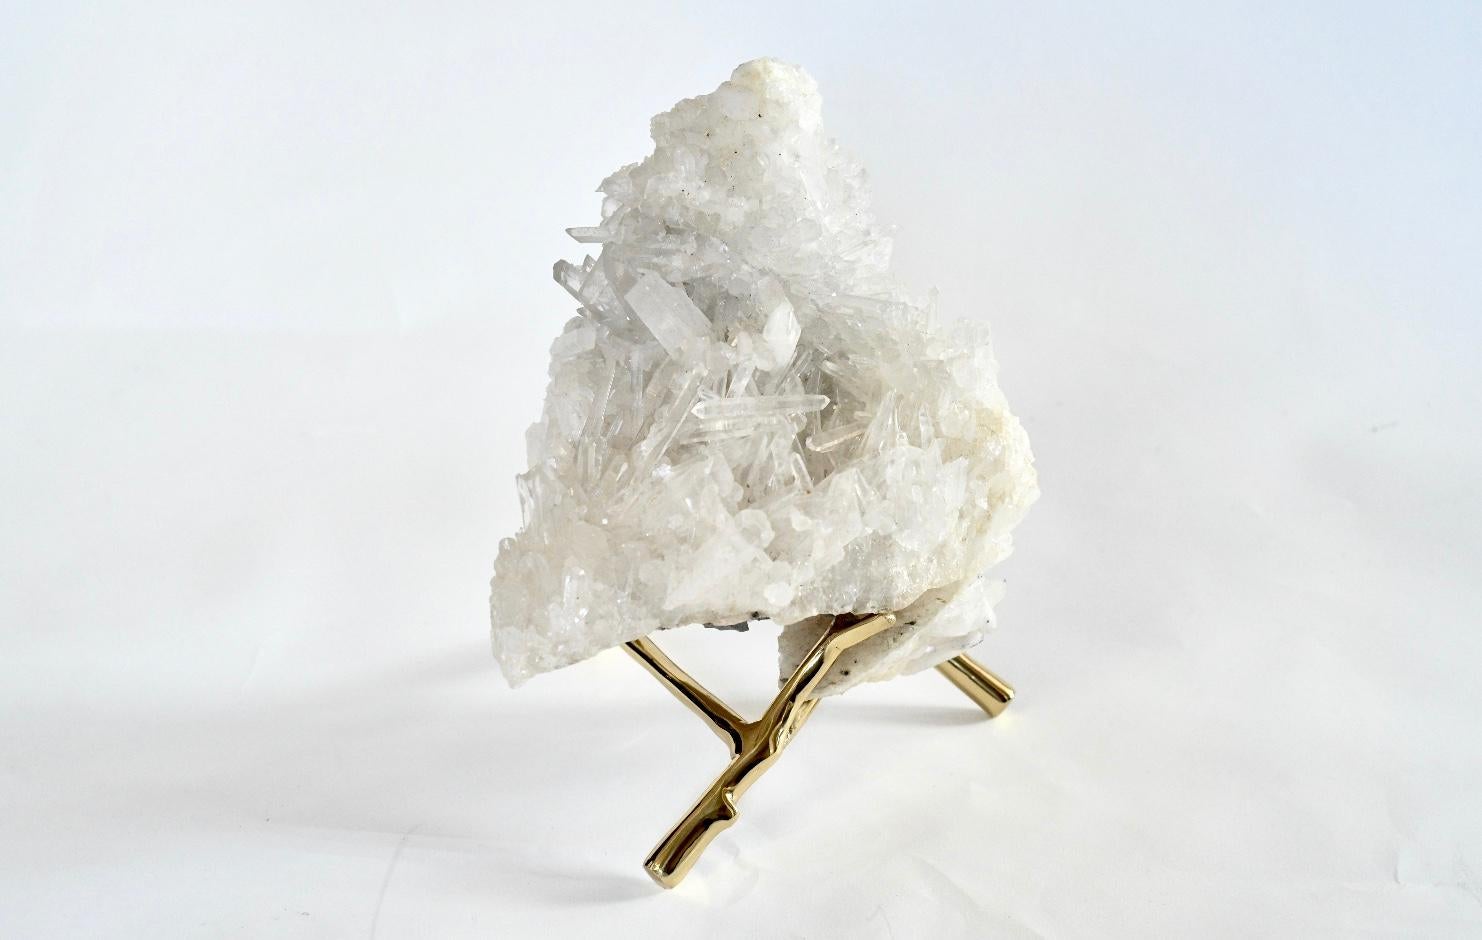 Natural quartz crystal sculpture with a stand.
The dimension of the crystal sculpture: 9